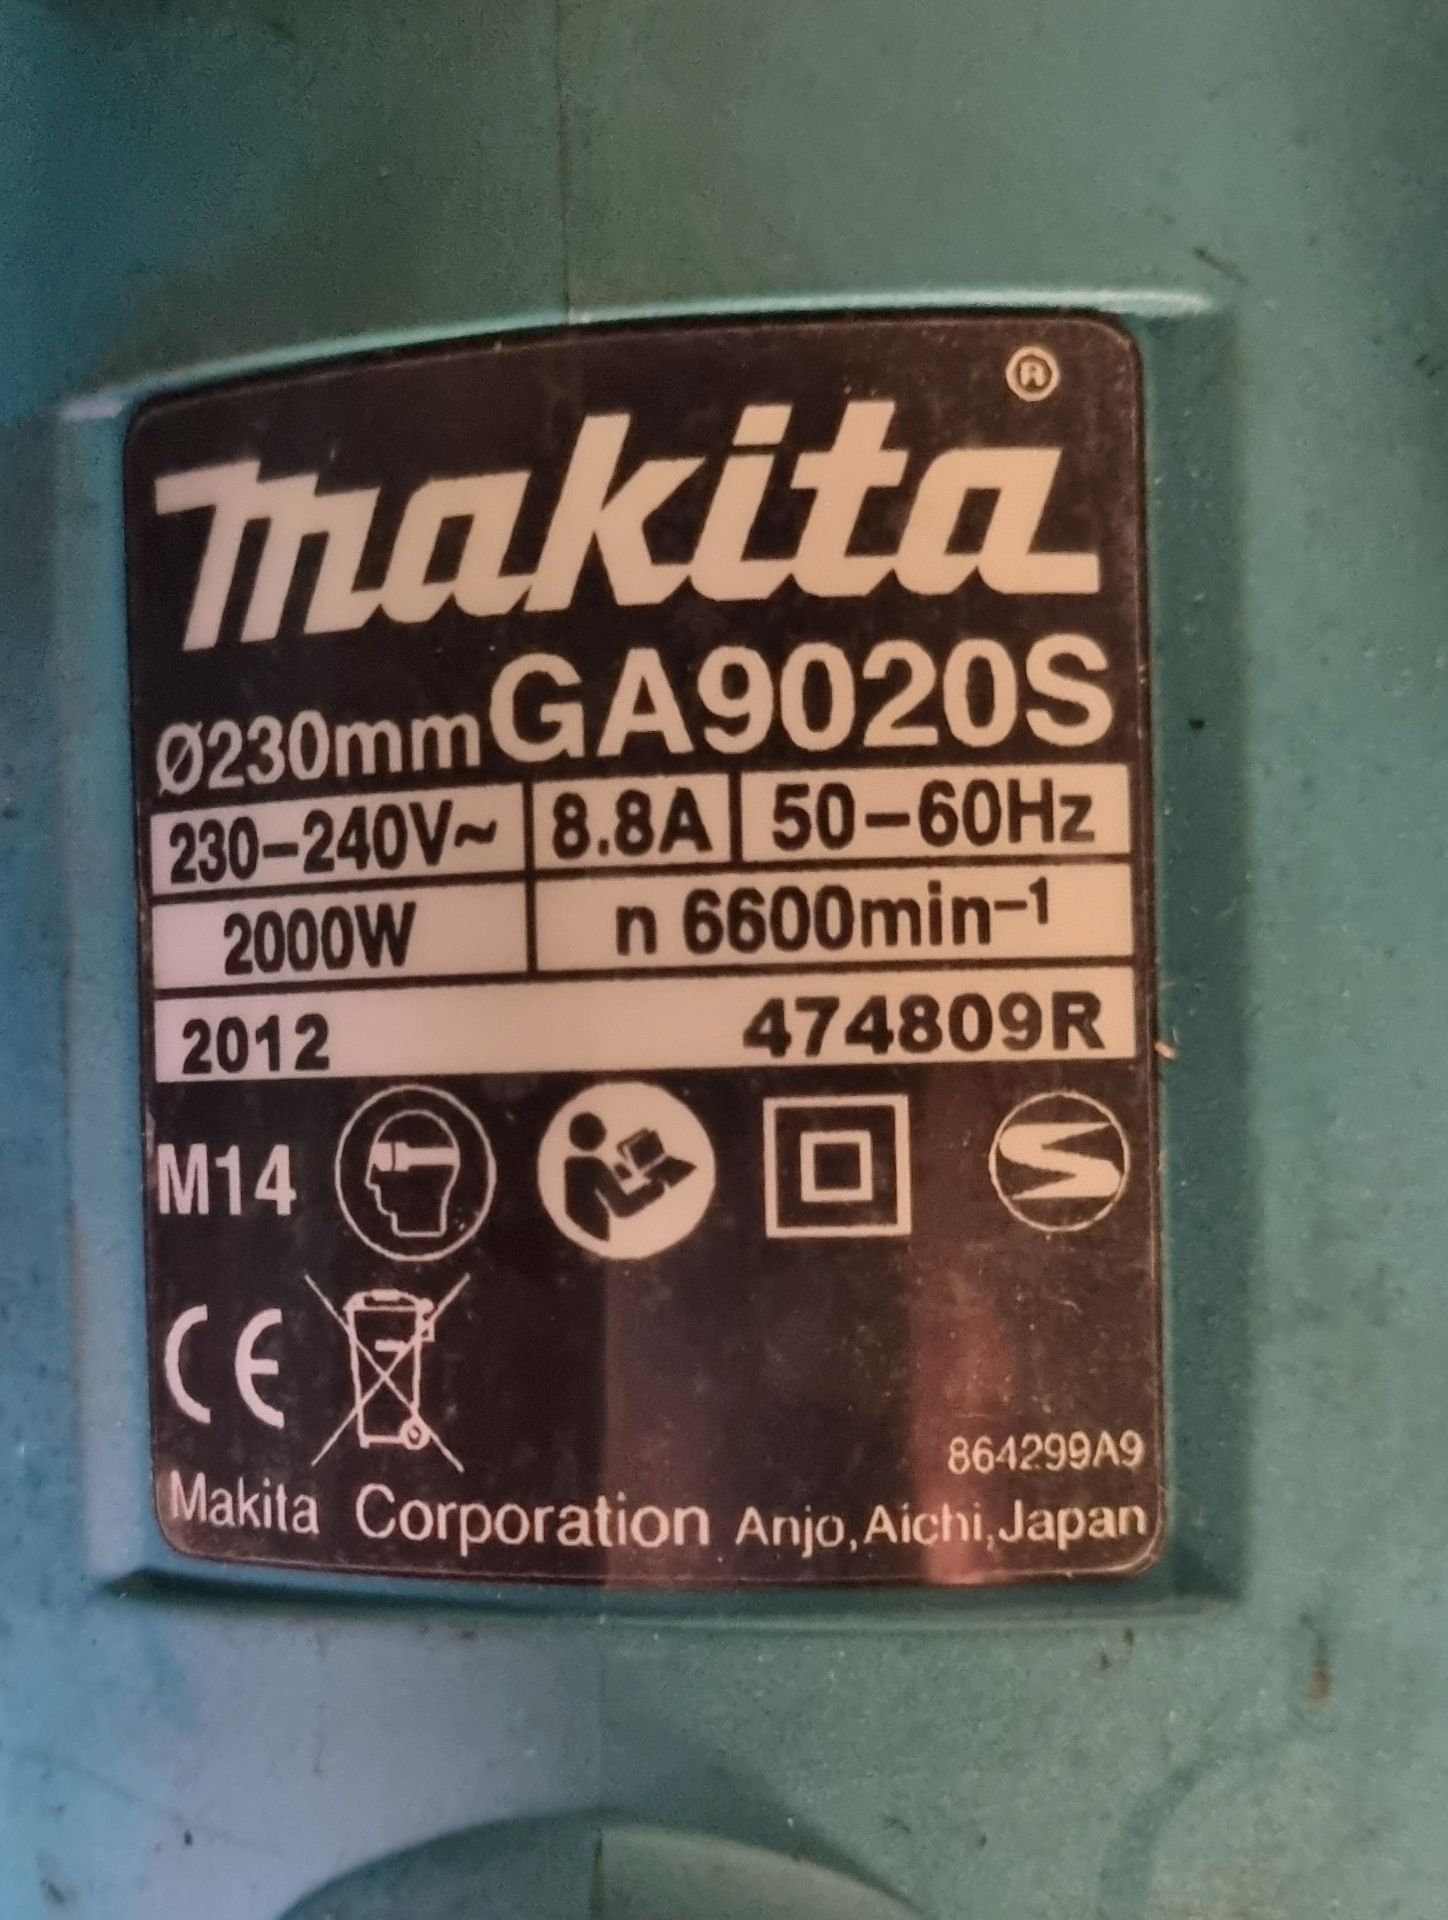 Makita GA9020S 9 inch electric angle grinder with case - 2000W - no discs - missing key - Image 5 of 7